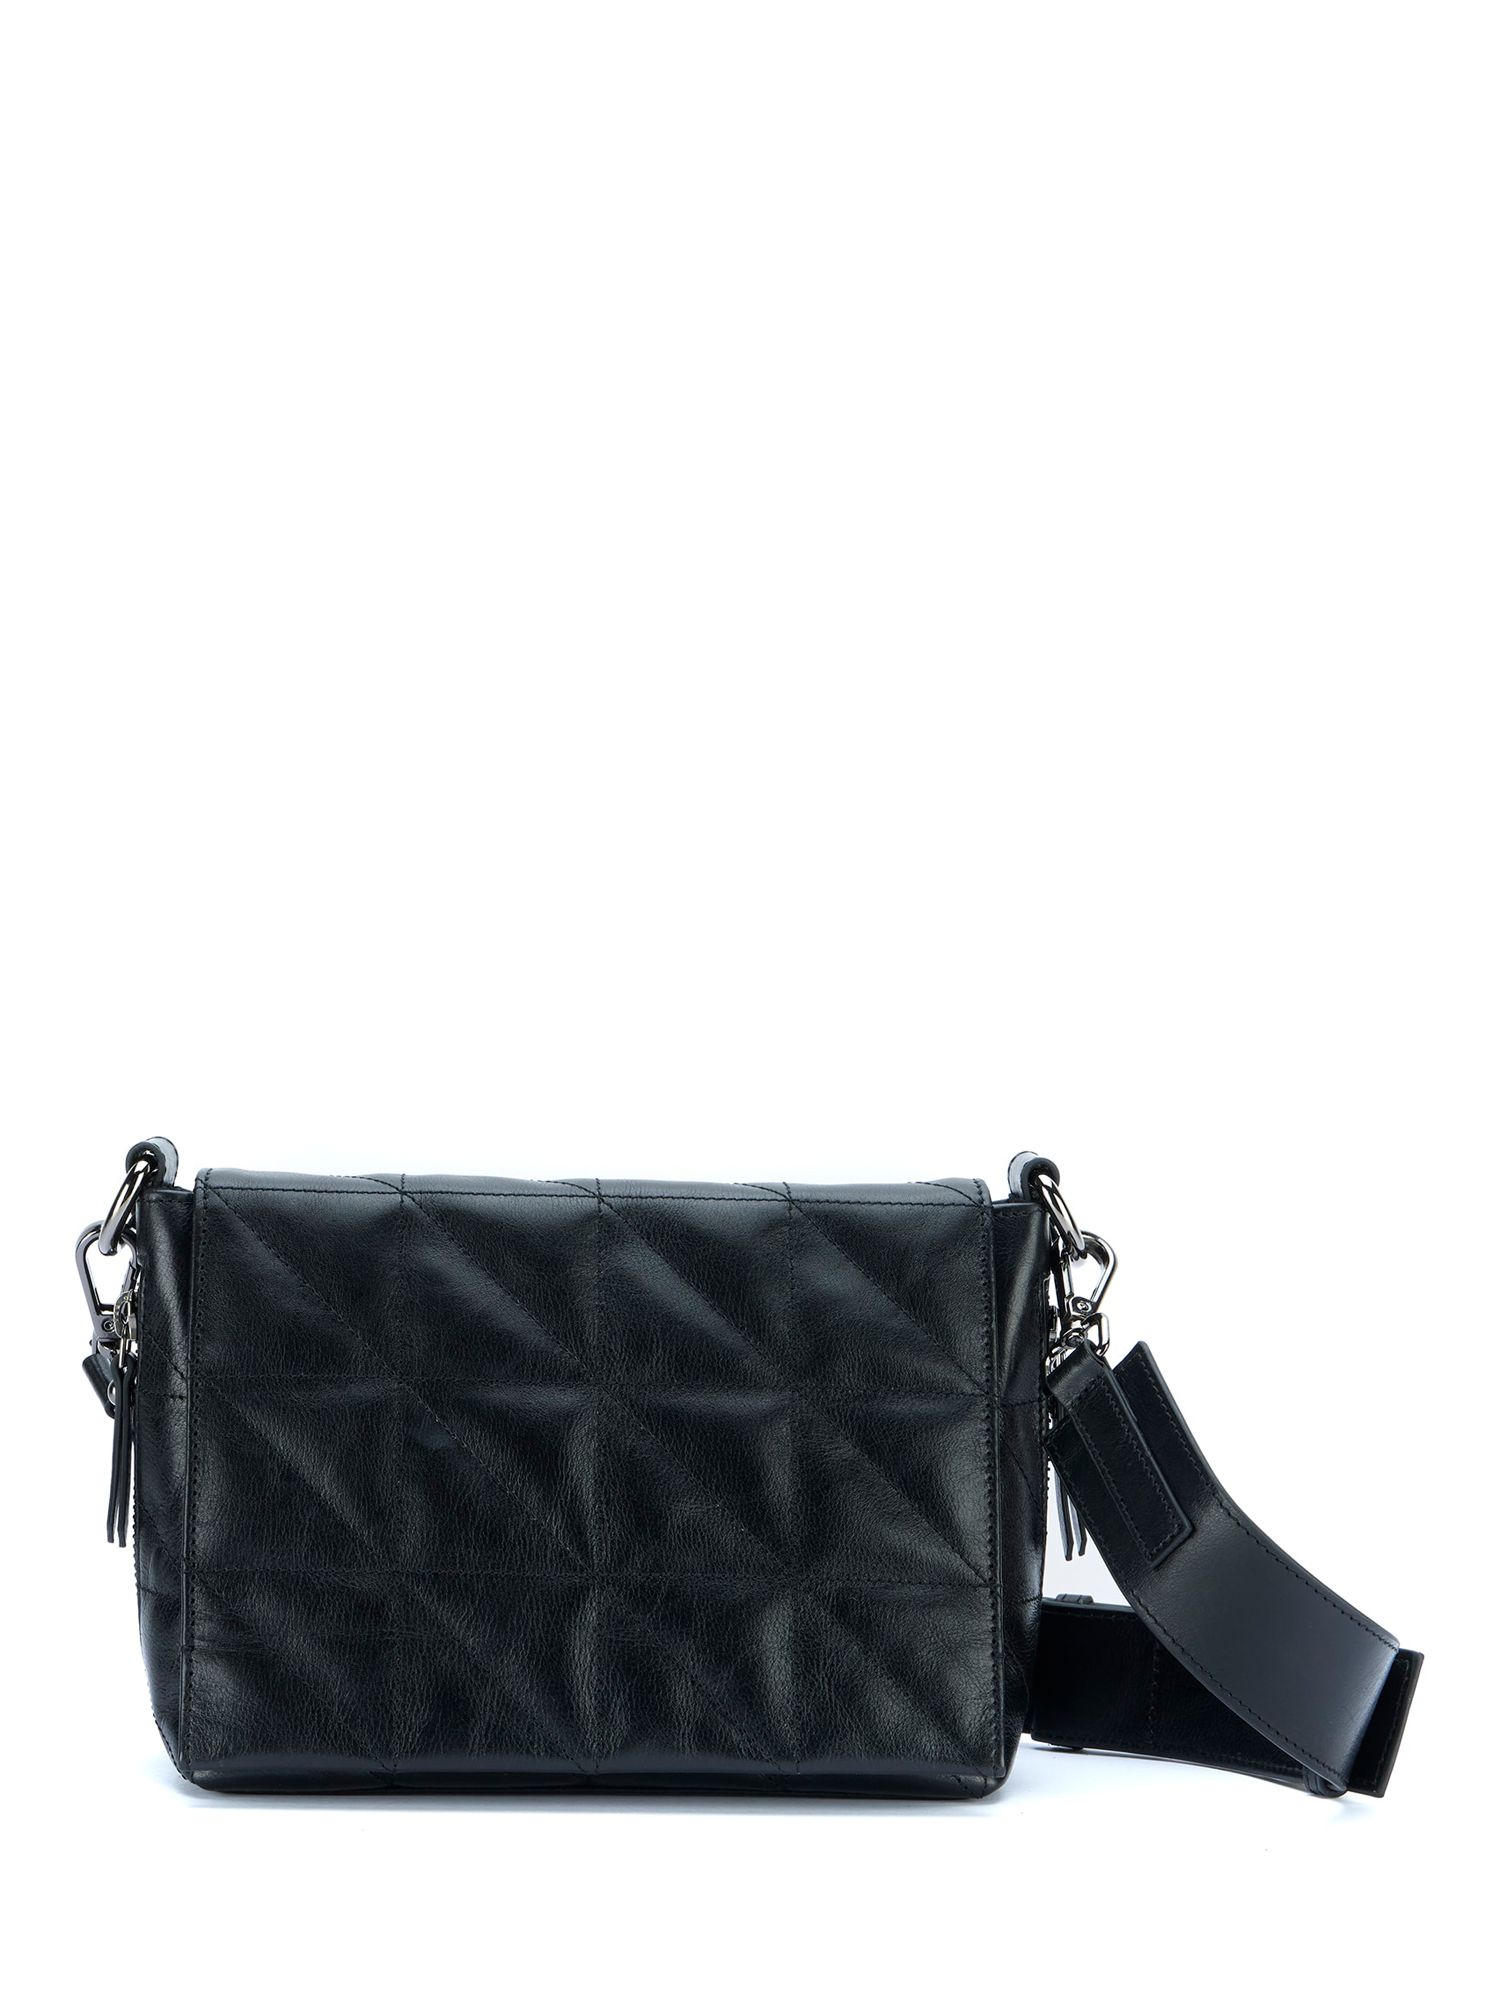 Mint Velvet Quilted Leather Crossbody Bag, Black, One Size